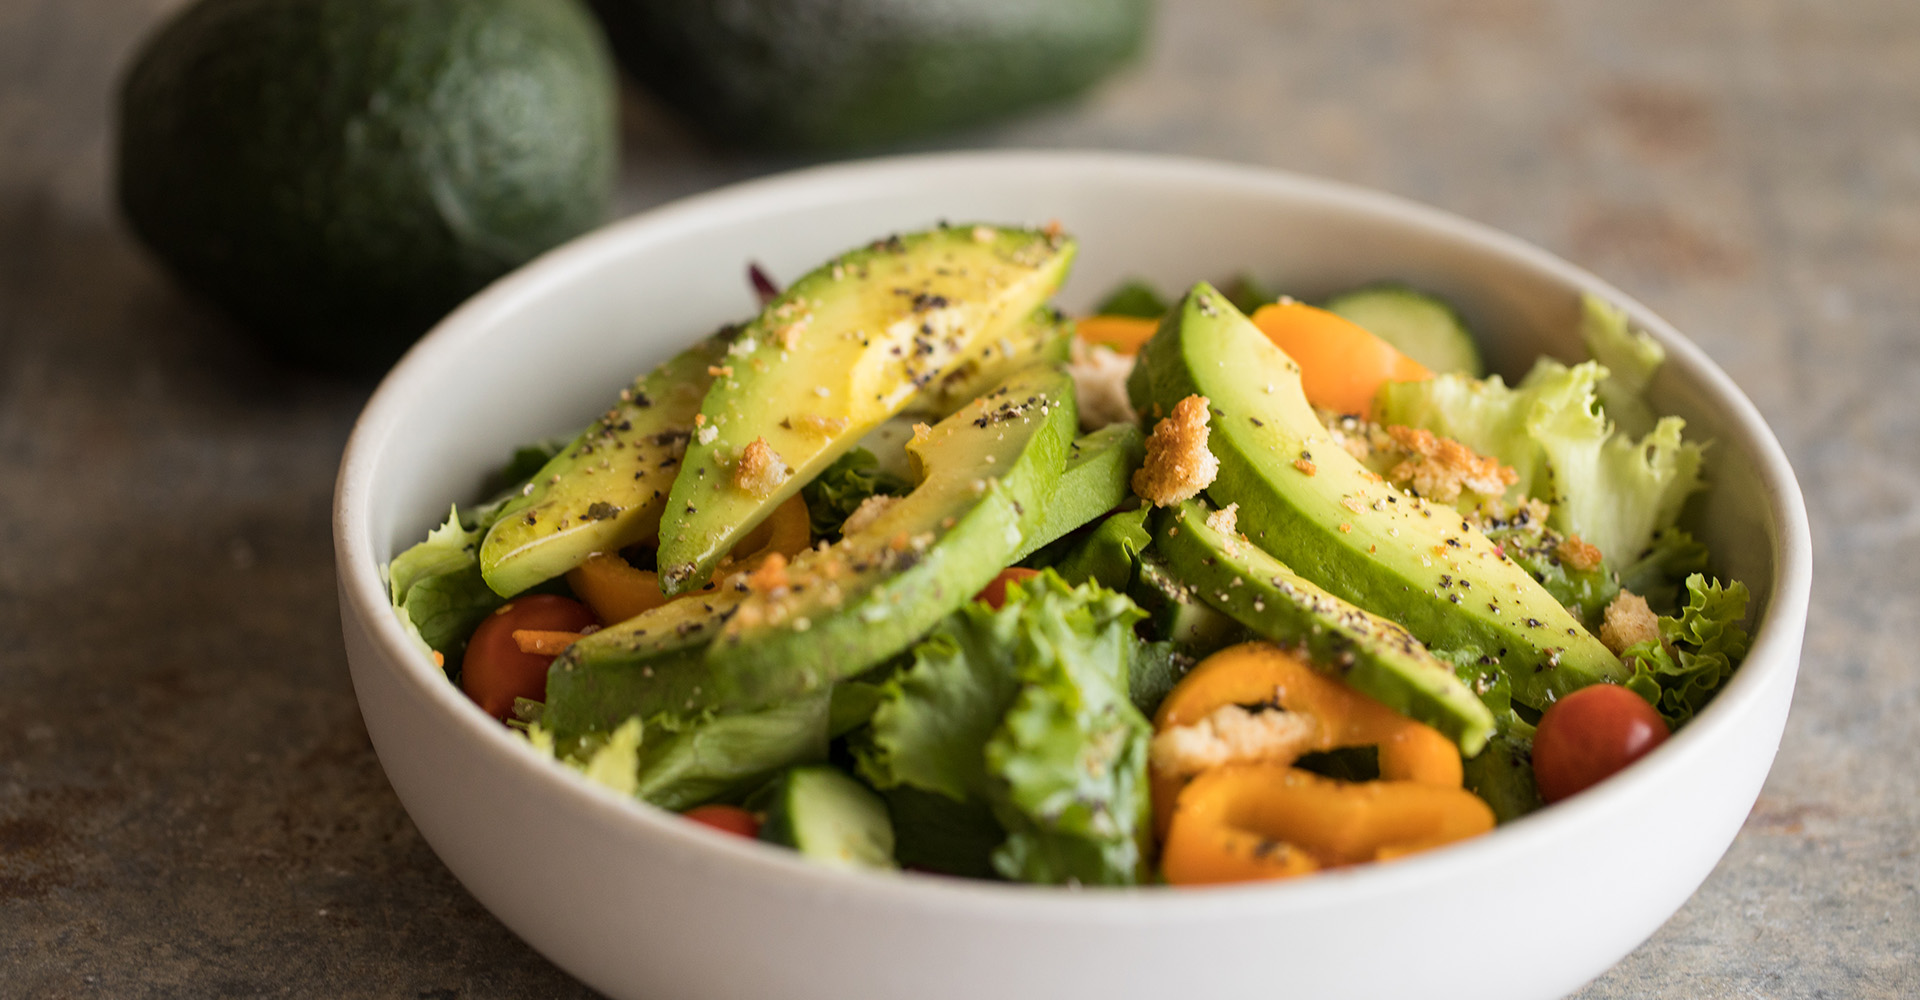 bowl filled with salad and topped with avocados